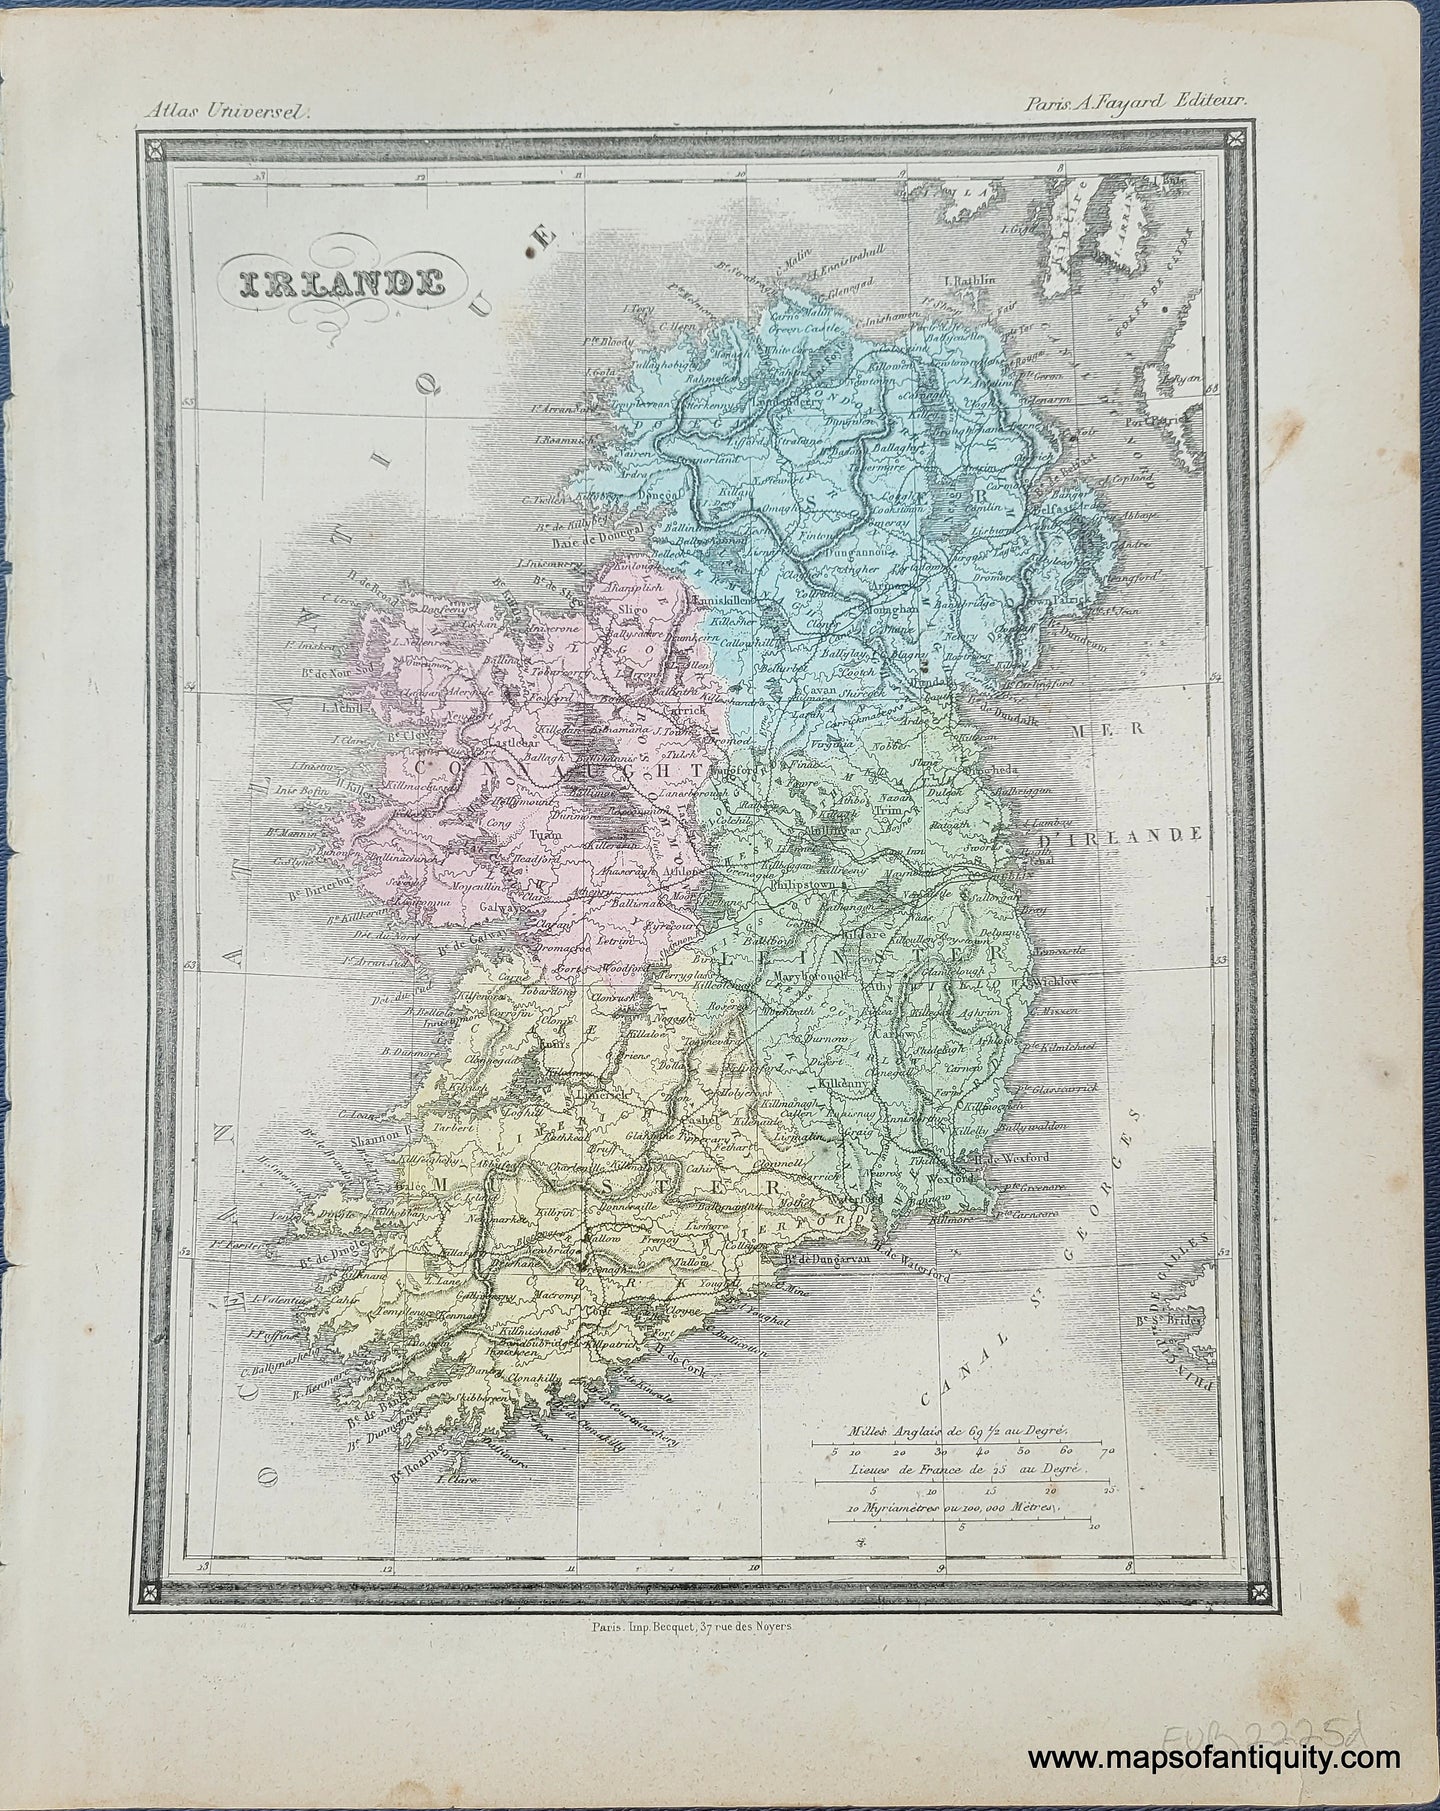 Antique-Map-Ireland-Irlande-Country-Fayard-Atlas-Universel-French-1877-1870s-1800s-Mid-Late-19th-Century-Maps-of-Antiquity